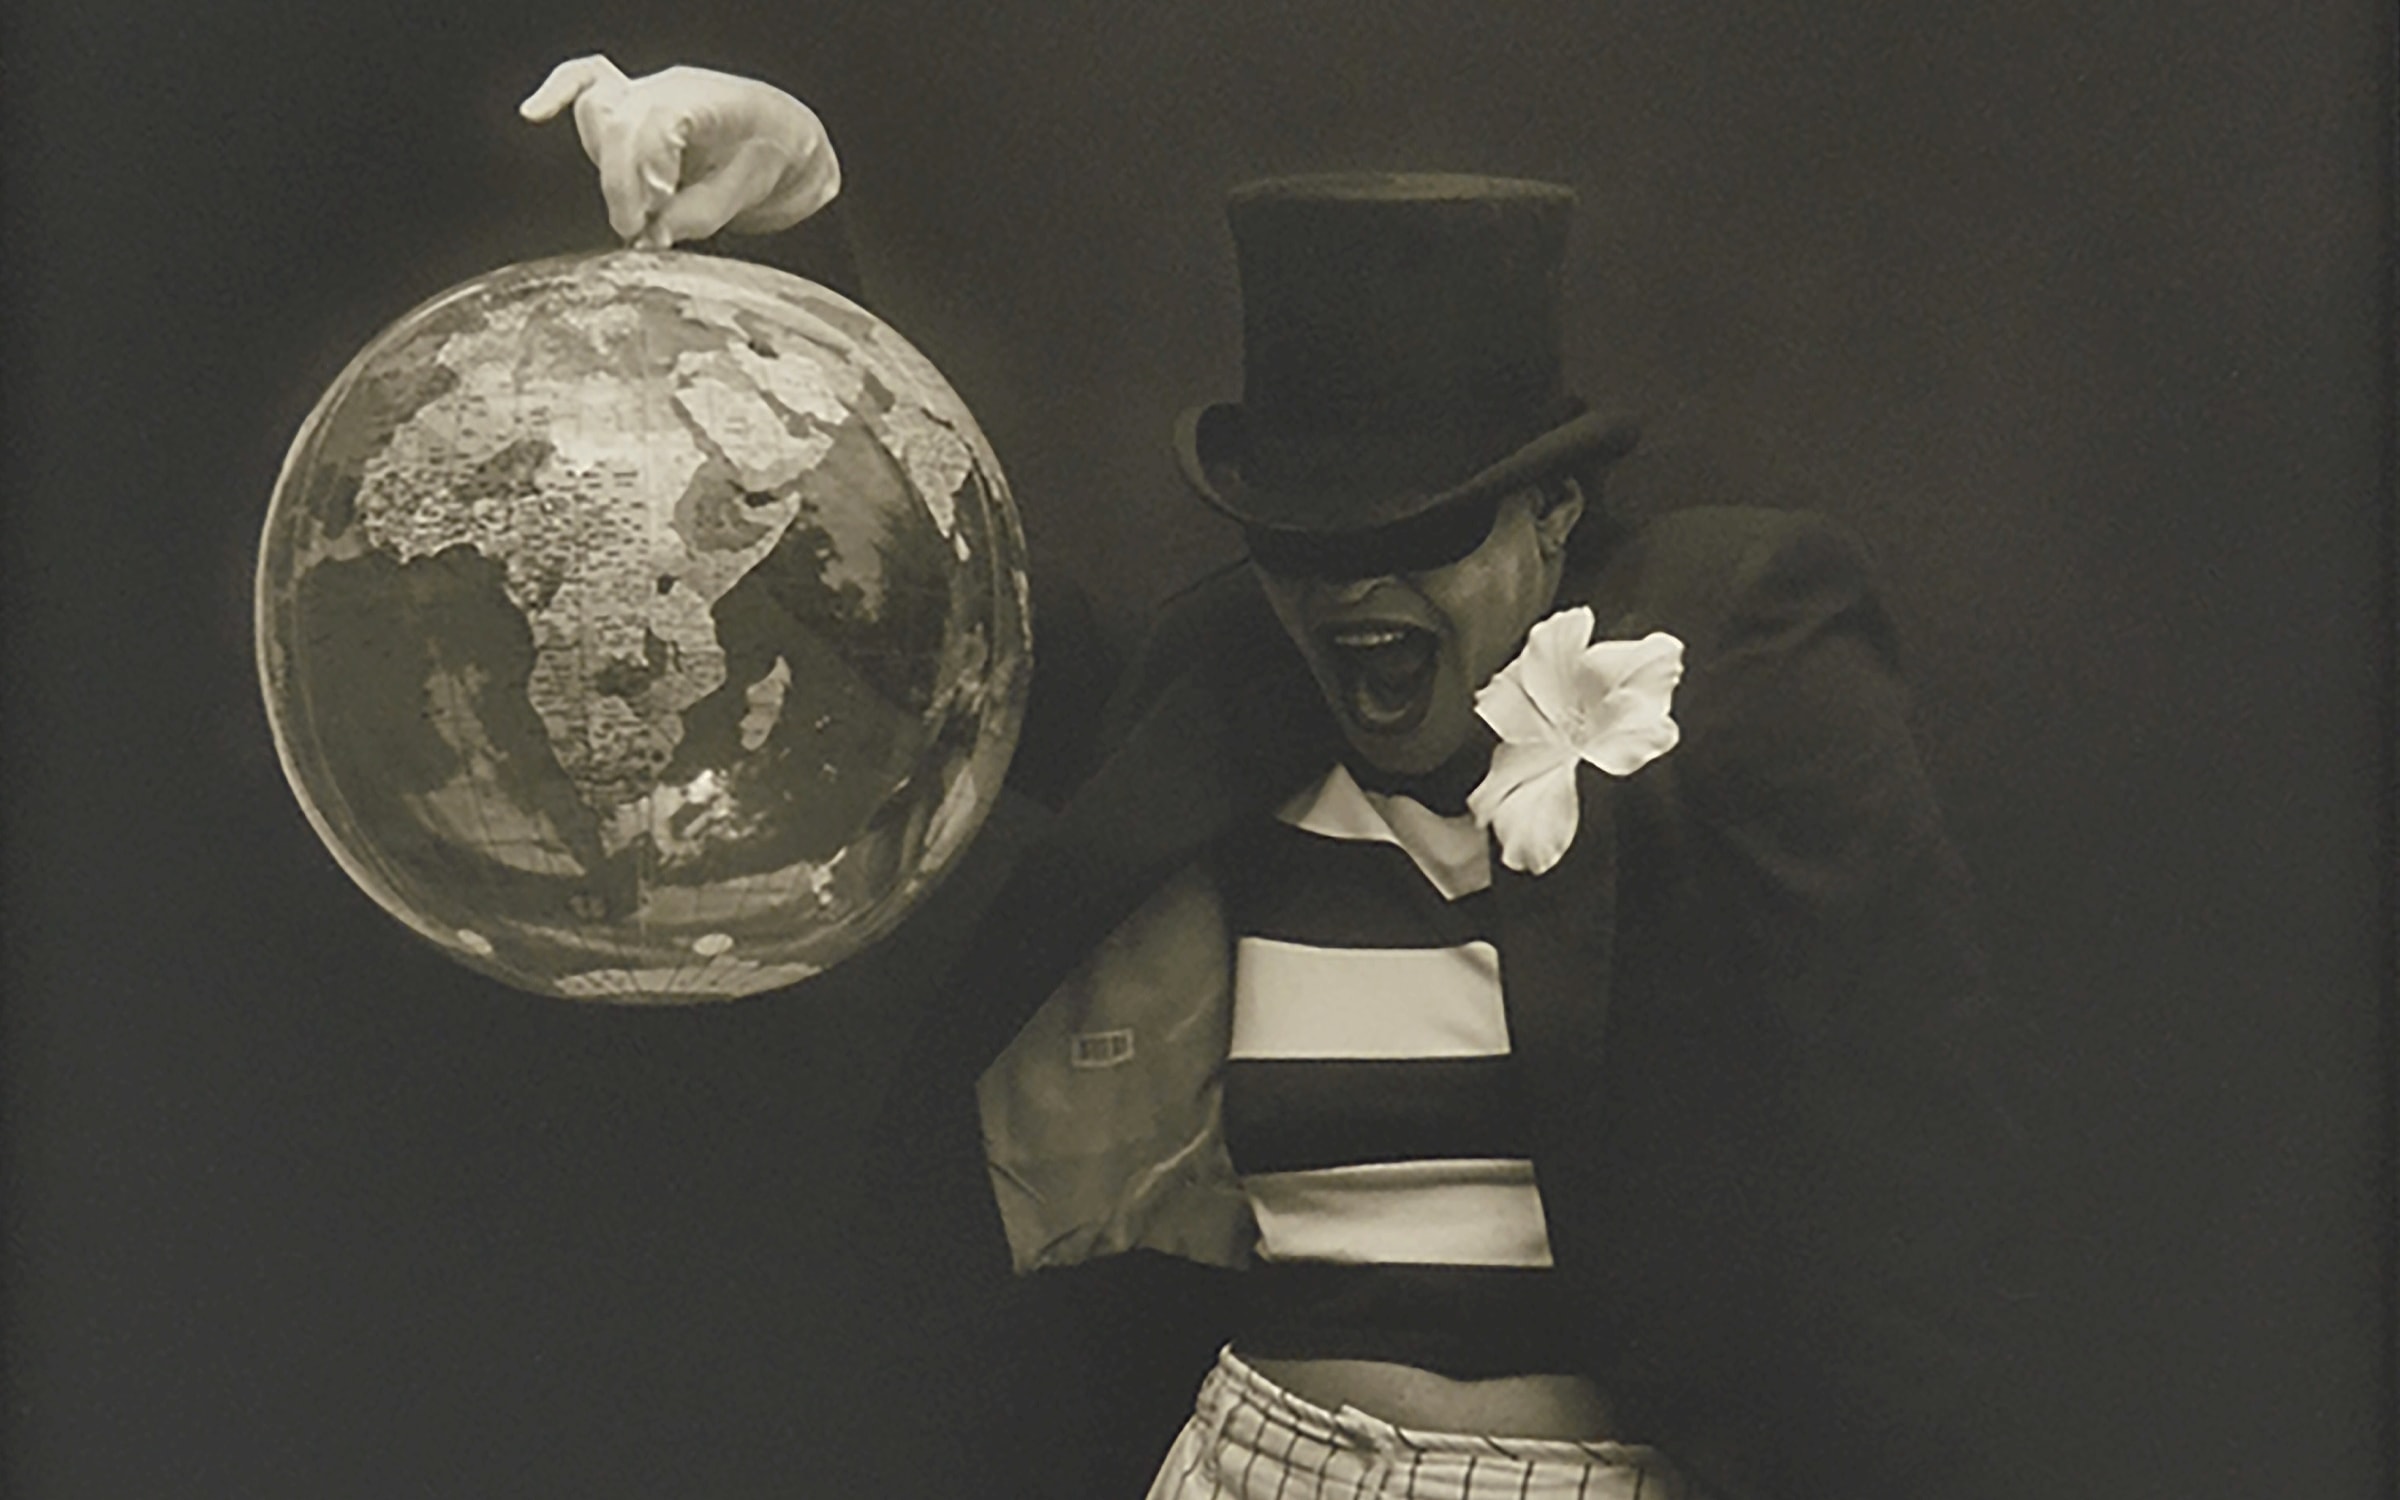 Carrie Mae Weems, If I Ruled the World (detail), 2004. © Carrie Mae Weems. Courtesy of the artist, Jack Shainman Gallery, New York, Galerie Barbara Thumm, Berlin, and Fraenkel Gallery, San Francisco.